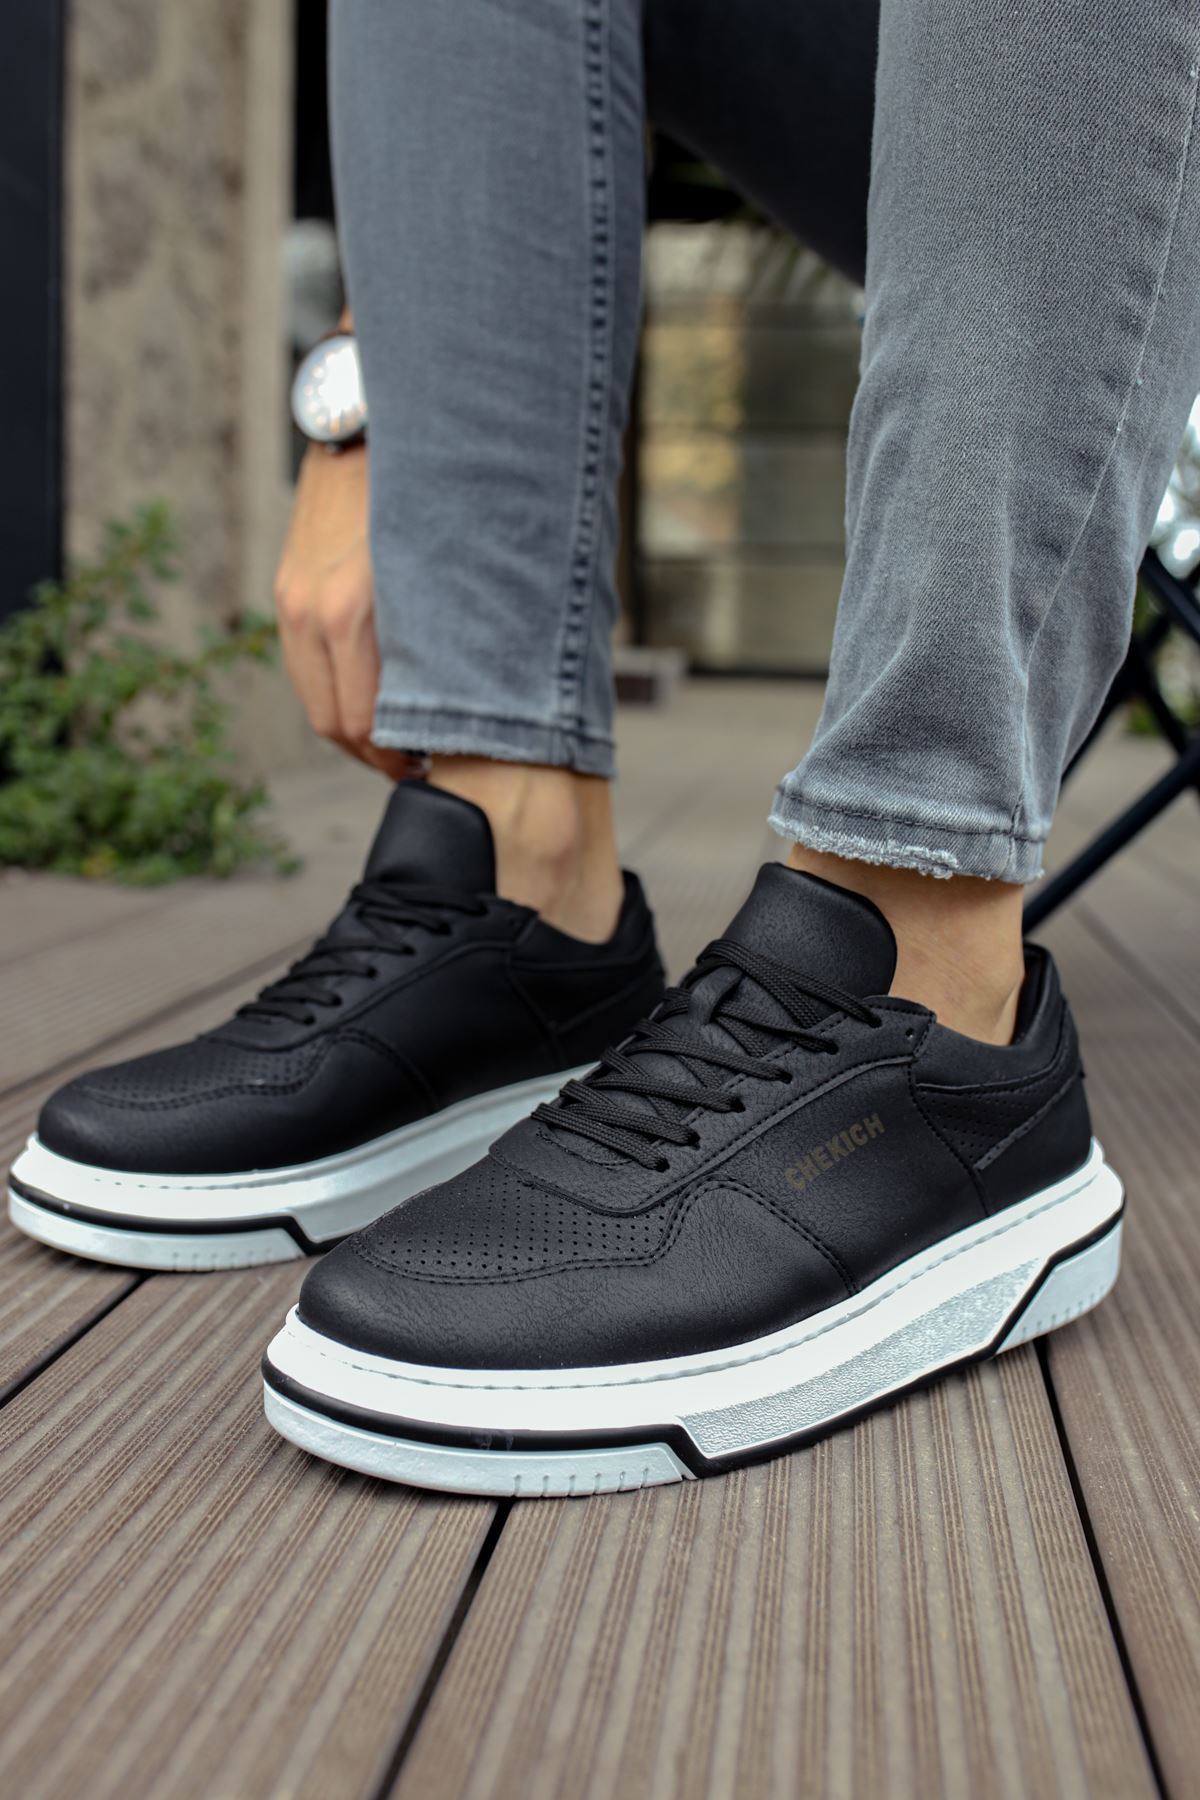 Chekich Men's & Women's Shoes Black Faux Leather Solid Color Lace Up Spring and Autumn Seasons Comfortable Sneakers Flexible Fashion 2021 Casual Odorless High Sole Orthopedic Lightweight Breathable Flat Suits CH075 V5